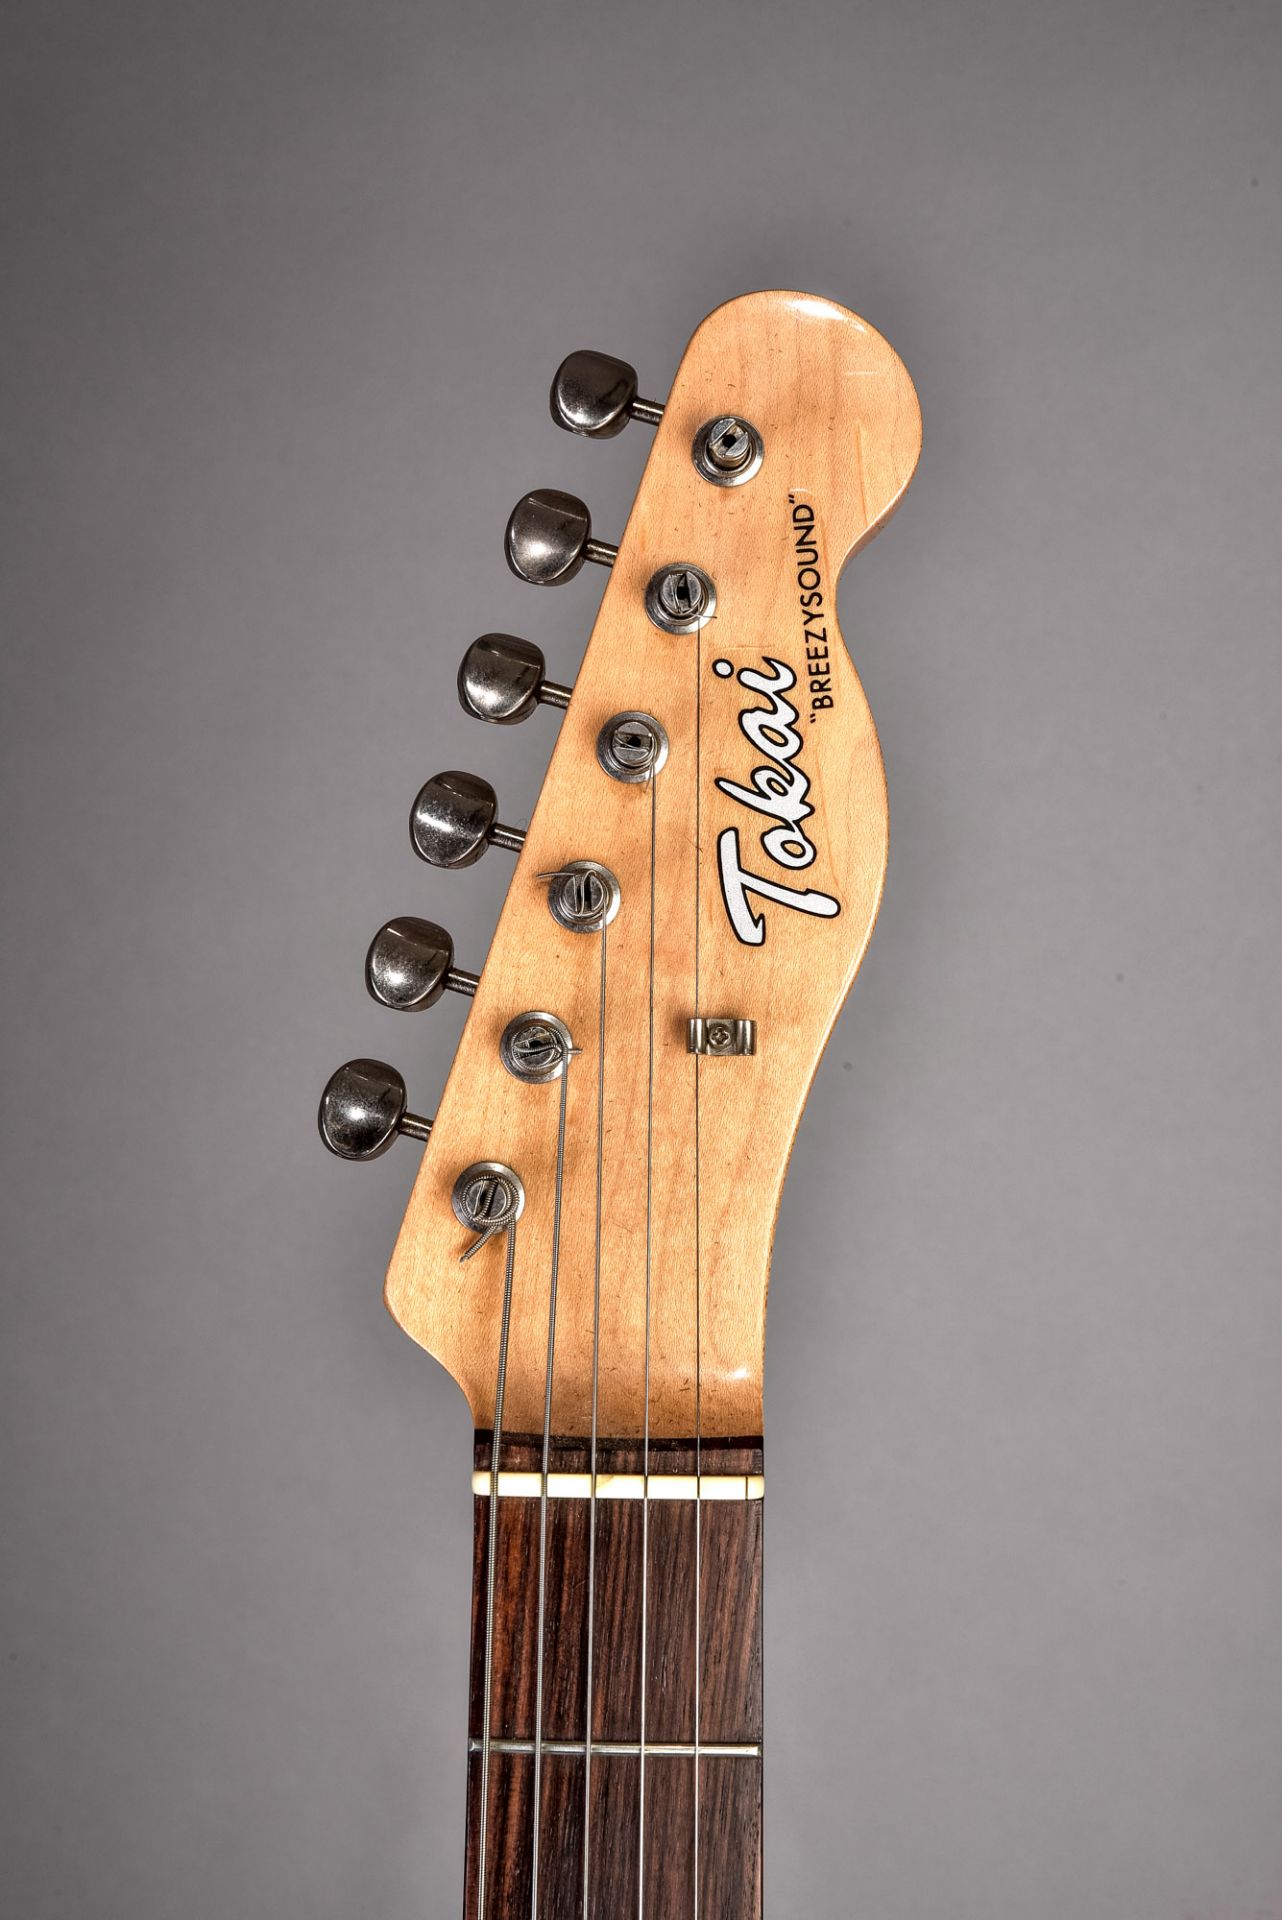 Electric guitar, Tokai "Breezysound" (Tele). Light brown, black rimmed sunburst solid body with whi - Image 8 of 14